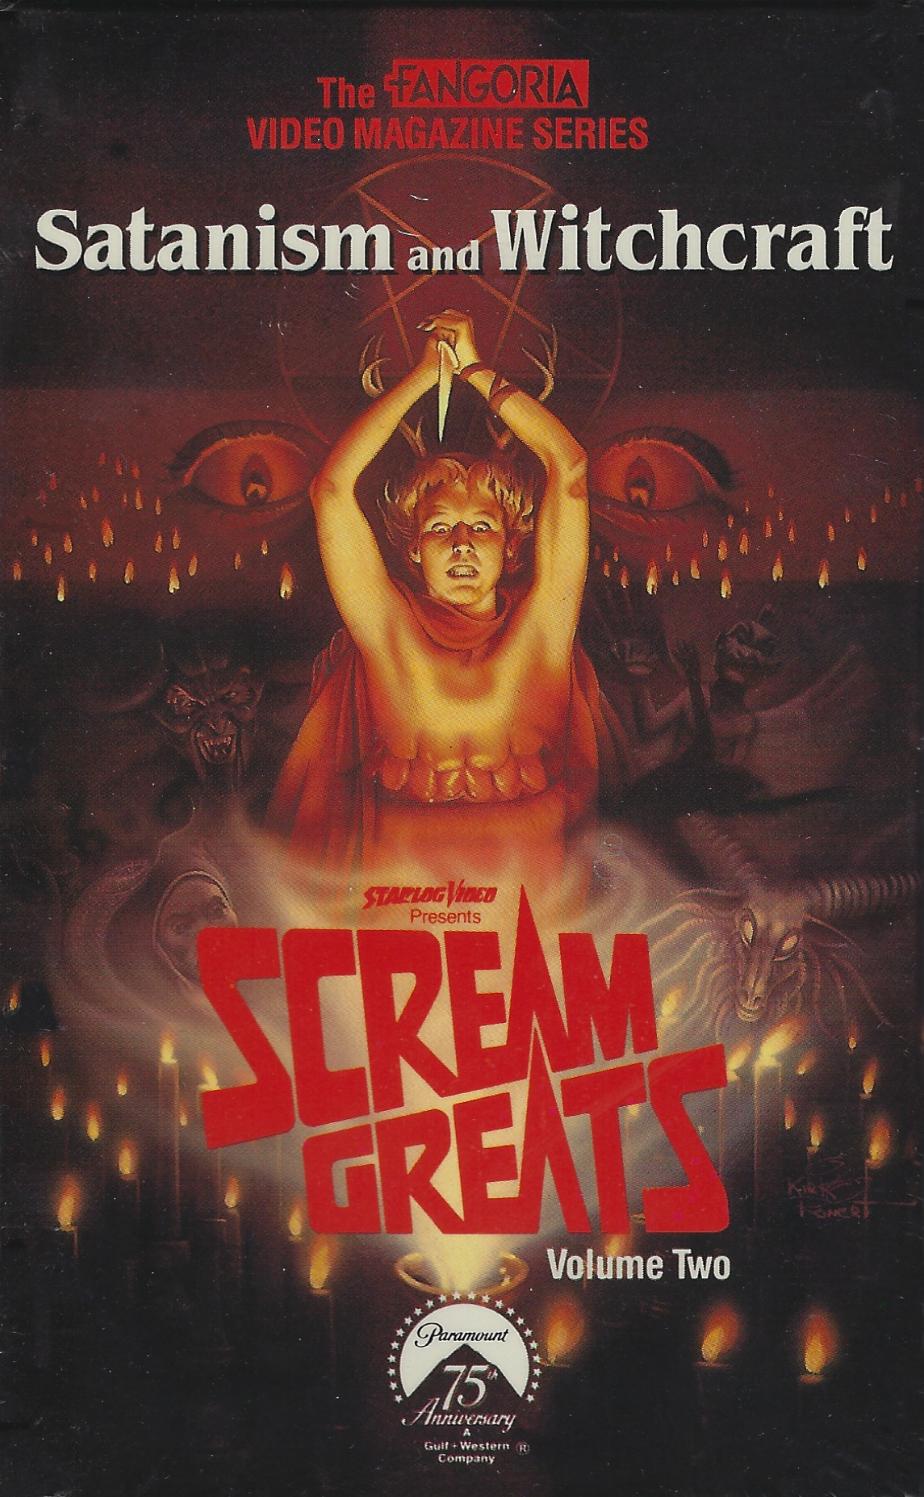 Scream Greats, Vol. 2: Satanism and Witchcraft (1986) starring Annette on DVD on DVD